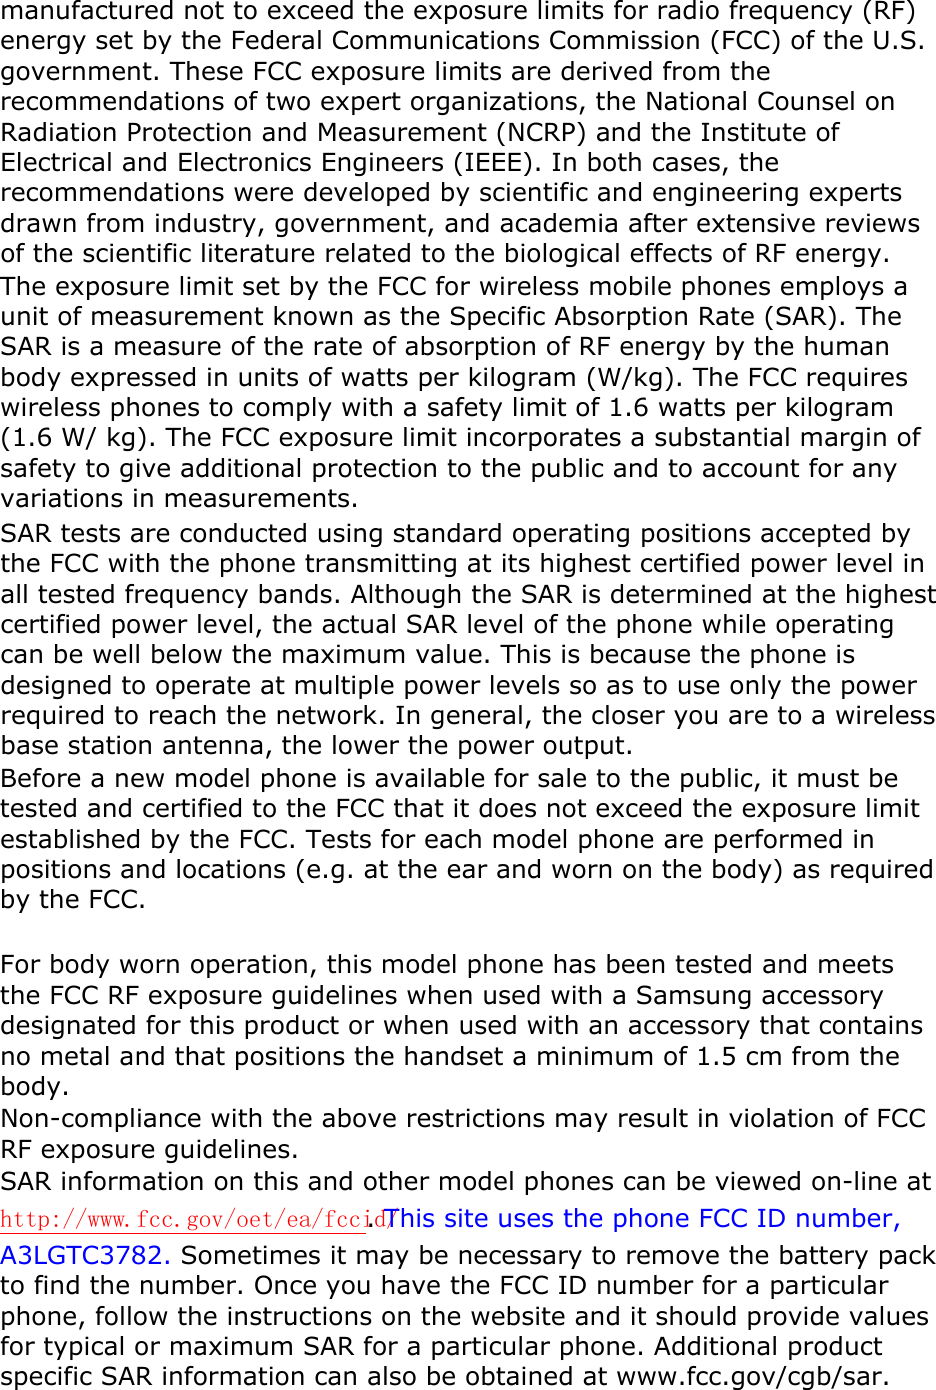 manufactured not to exceed the exposure limits for radio frequency (RF) energy set by the Federal Communications Commission (FCC) of the U.S. government. These FCC exposure limits are derived from the recommendations of two expert organizations, the National Counsel on Radiation Protection and Measurement (NCRP) and the Institute of Electrical and Electronics Engineers (IEEE). In both cases, the recommendations were developed by scientific and engineering experts drawn from industry, government, and academia after extensive reviews of the scientific literature related to the biological effects of RF energy.The exposure limit set by the FCC for wireless mobile phones employs a unit of measurement known as the Specific Absorption Rate (SAR). The SAR is a measure of the rate of absorption of RF energy by the human body expressed in units of watts per kilogram (W/kg). The FCC requires wireless phones to comply with a safety limit of 1.6 watts per kilogram (1.6 W/ kg). The FCC exposure limit incorporates a substantial margin of safety to give additional protection to the public and to account for any variations in measurements.SAR tests are conducted using standard operating positions accepted by the FCC with the phone transmitting at its highest certified power level in all tested frequency bands. Although the SAR is determined at the highest certified power level, the actual SAR level of the phone while operating can be well below the maximum value. This is because the phone is designed to operate at multiple power levels so as to use only the power required to reach the network. In general, the closer you are to a wireless base station antenna, the lower the power output. Before a new model phone is available for sale to the public, it must be tested and certified to the FCC that it does not exceed the exposure limit established by the FCC. Tests for each model phone are performed in positions and locations (e.g. at the ear and worn on the body) as required by the FCC.     For body worn operation, this model phone has been tested and meets the FCC RF exposure guidelines when used with a Samsung accessory designated for this product or when used with an accessory that contains no metal and that positions the handset a minimum of 1.5 cm from the body.Non-compliance with the above restrictions may result in violation of FCC RF exposure guidelines. SAR information on this and other model phones can be viewed on-line at http://www.fcc.gov/oet/ea/fccid/.This site uses the phone FCC ID number, A3LGTC3782. Sometimes it may be necessary to remove the battery pack to find the number. Once you have the FCC ID number for a particular phone, follow the instructions on the website and it should provide values for typical or maximum SAR for a particular phone. Additional product specific SAR information can also be obtained at www.fcc.gov/cgb/sar. 